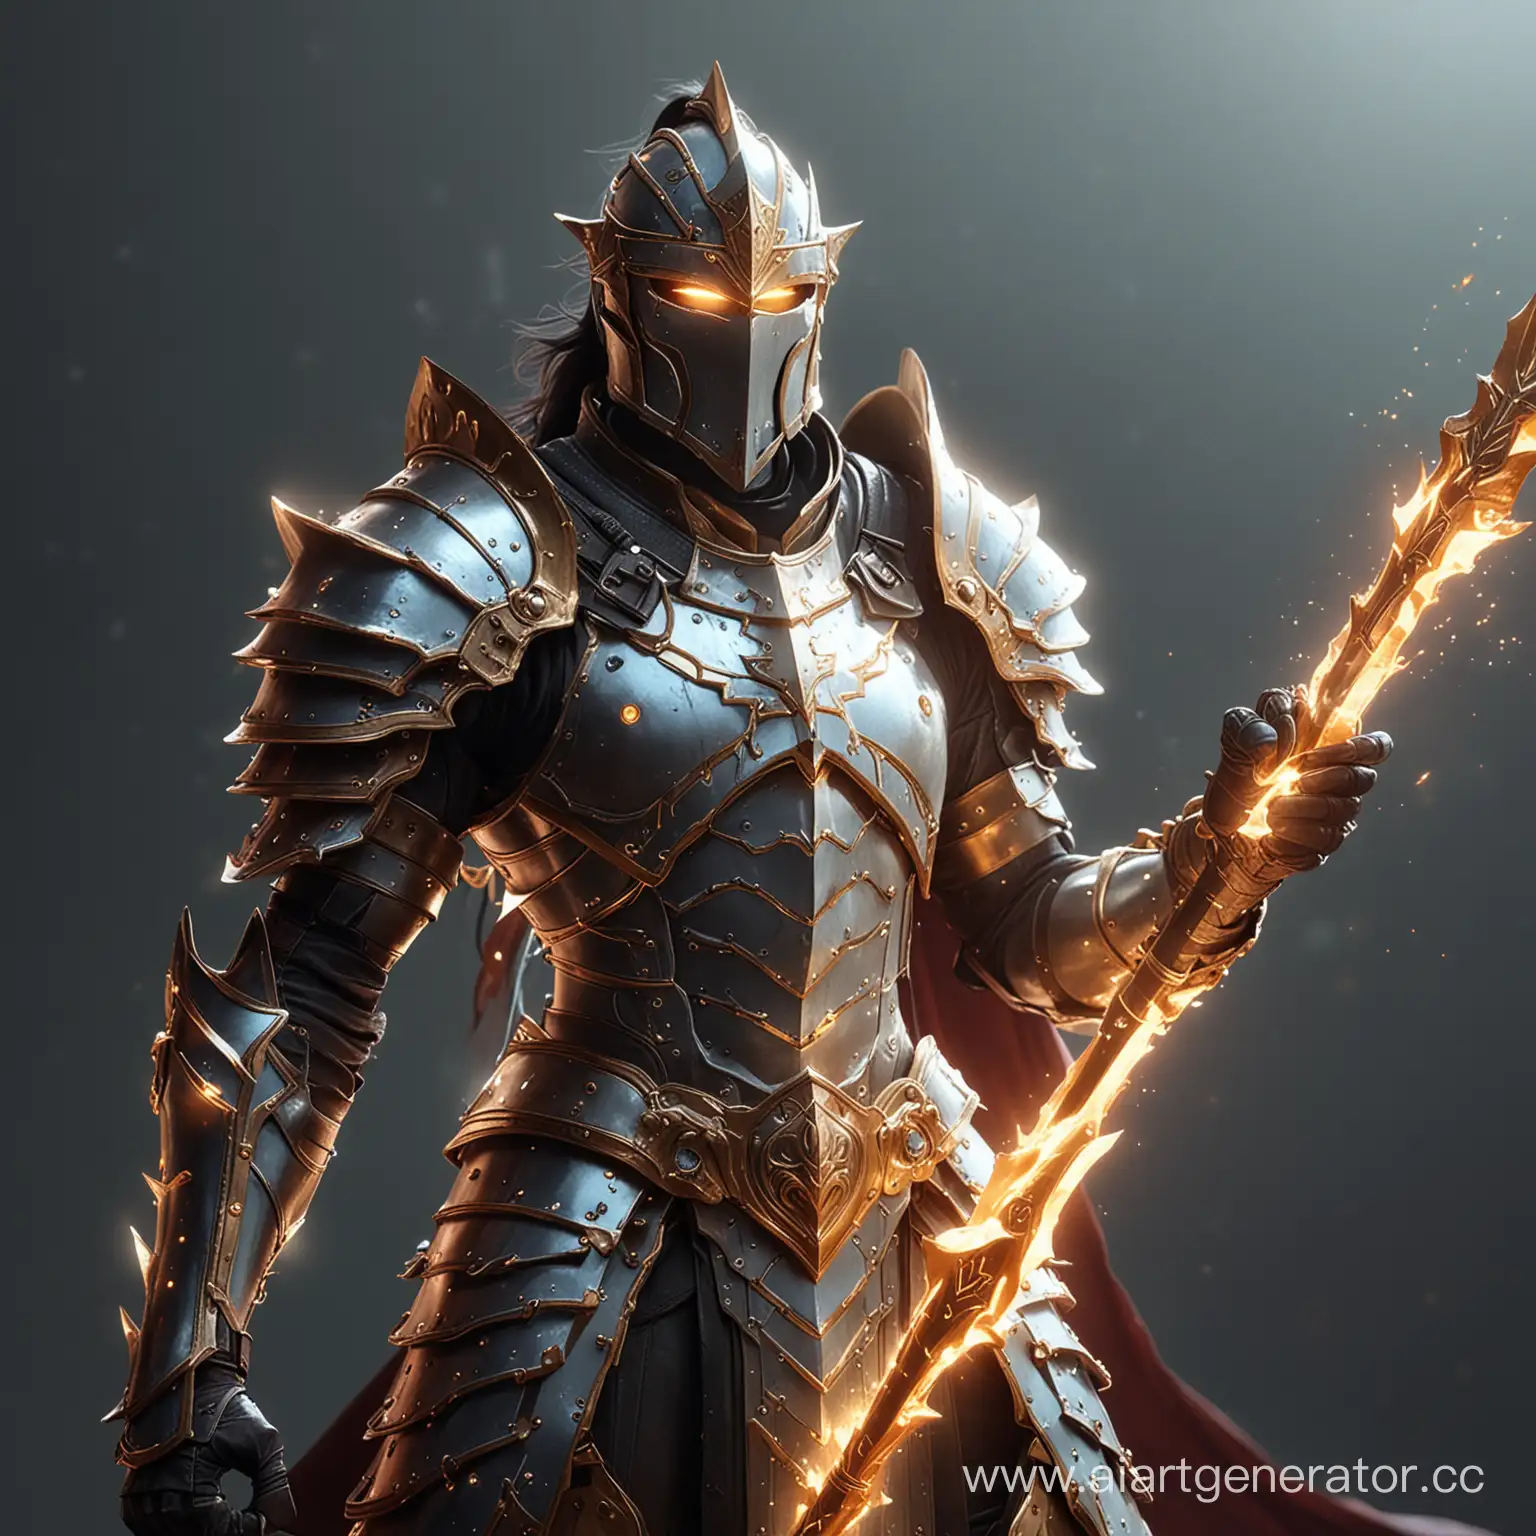 Radiant-Warrior-Luminous-Lancer-Piercing-the-Darkness-with-Gleaming-Armor-and-Spear